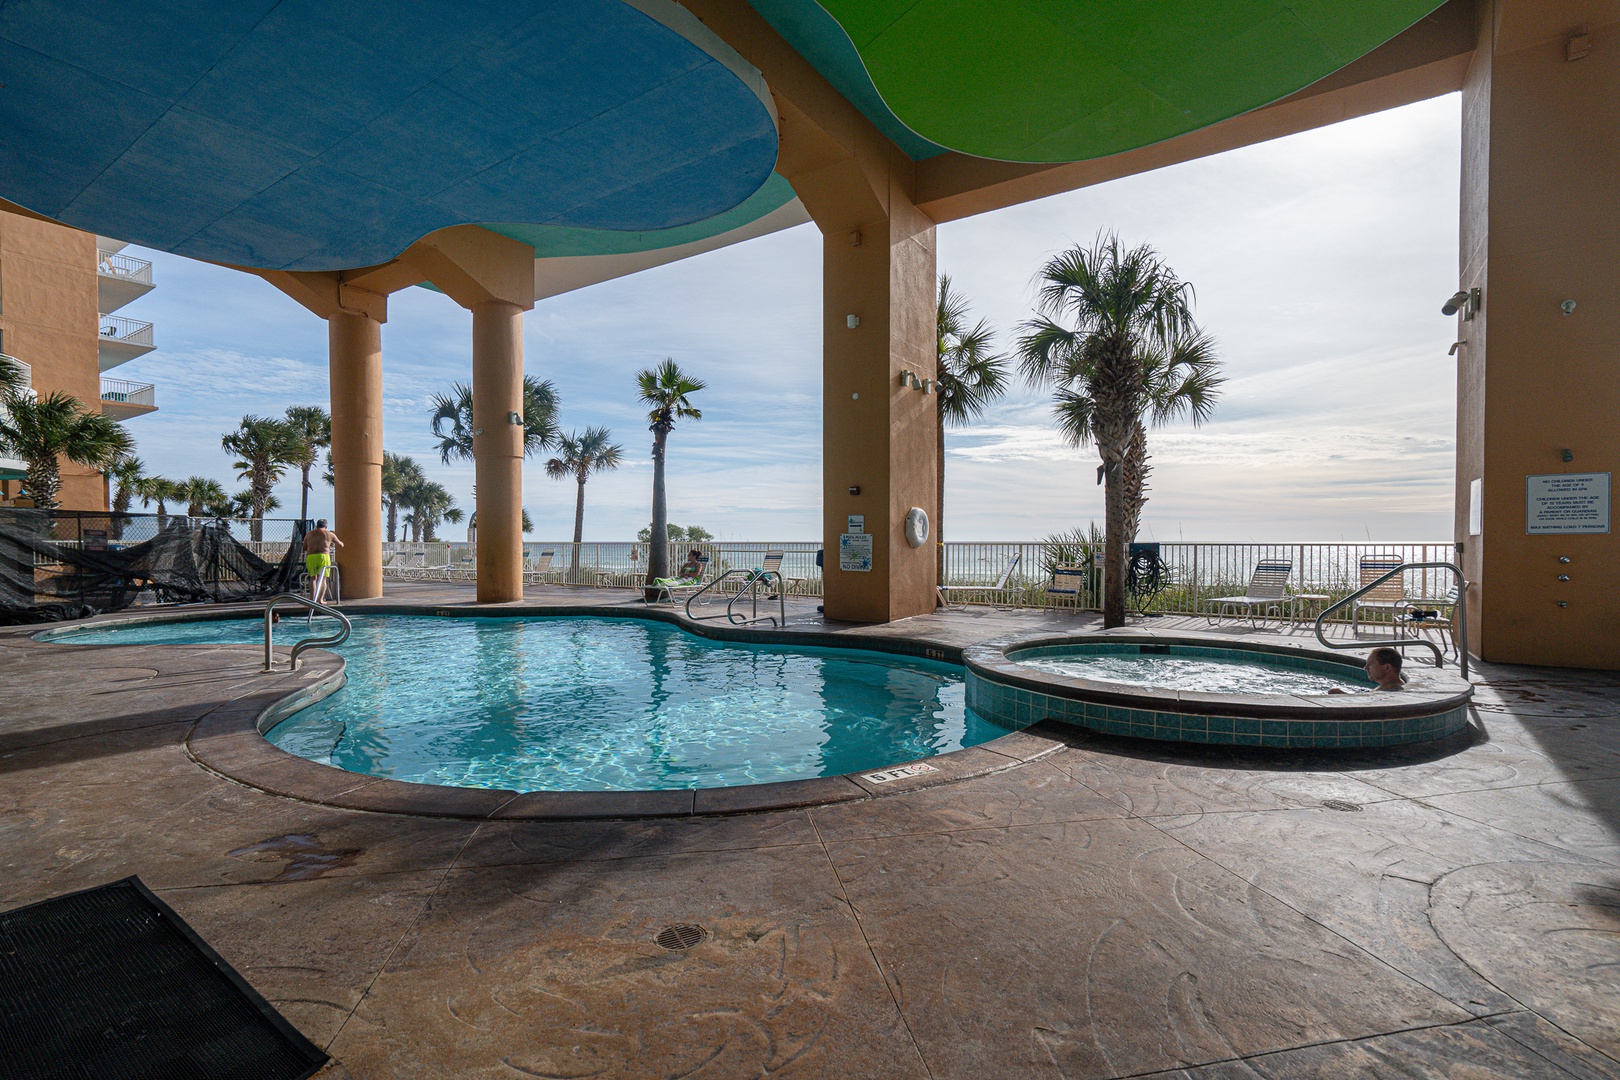 Enjoy all the fabulous amenities this resort community has to offer